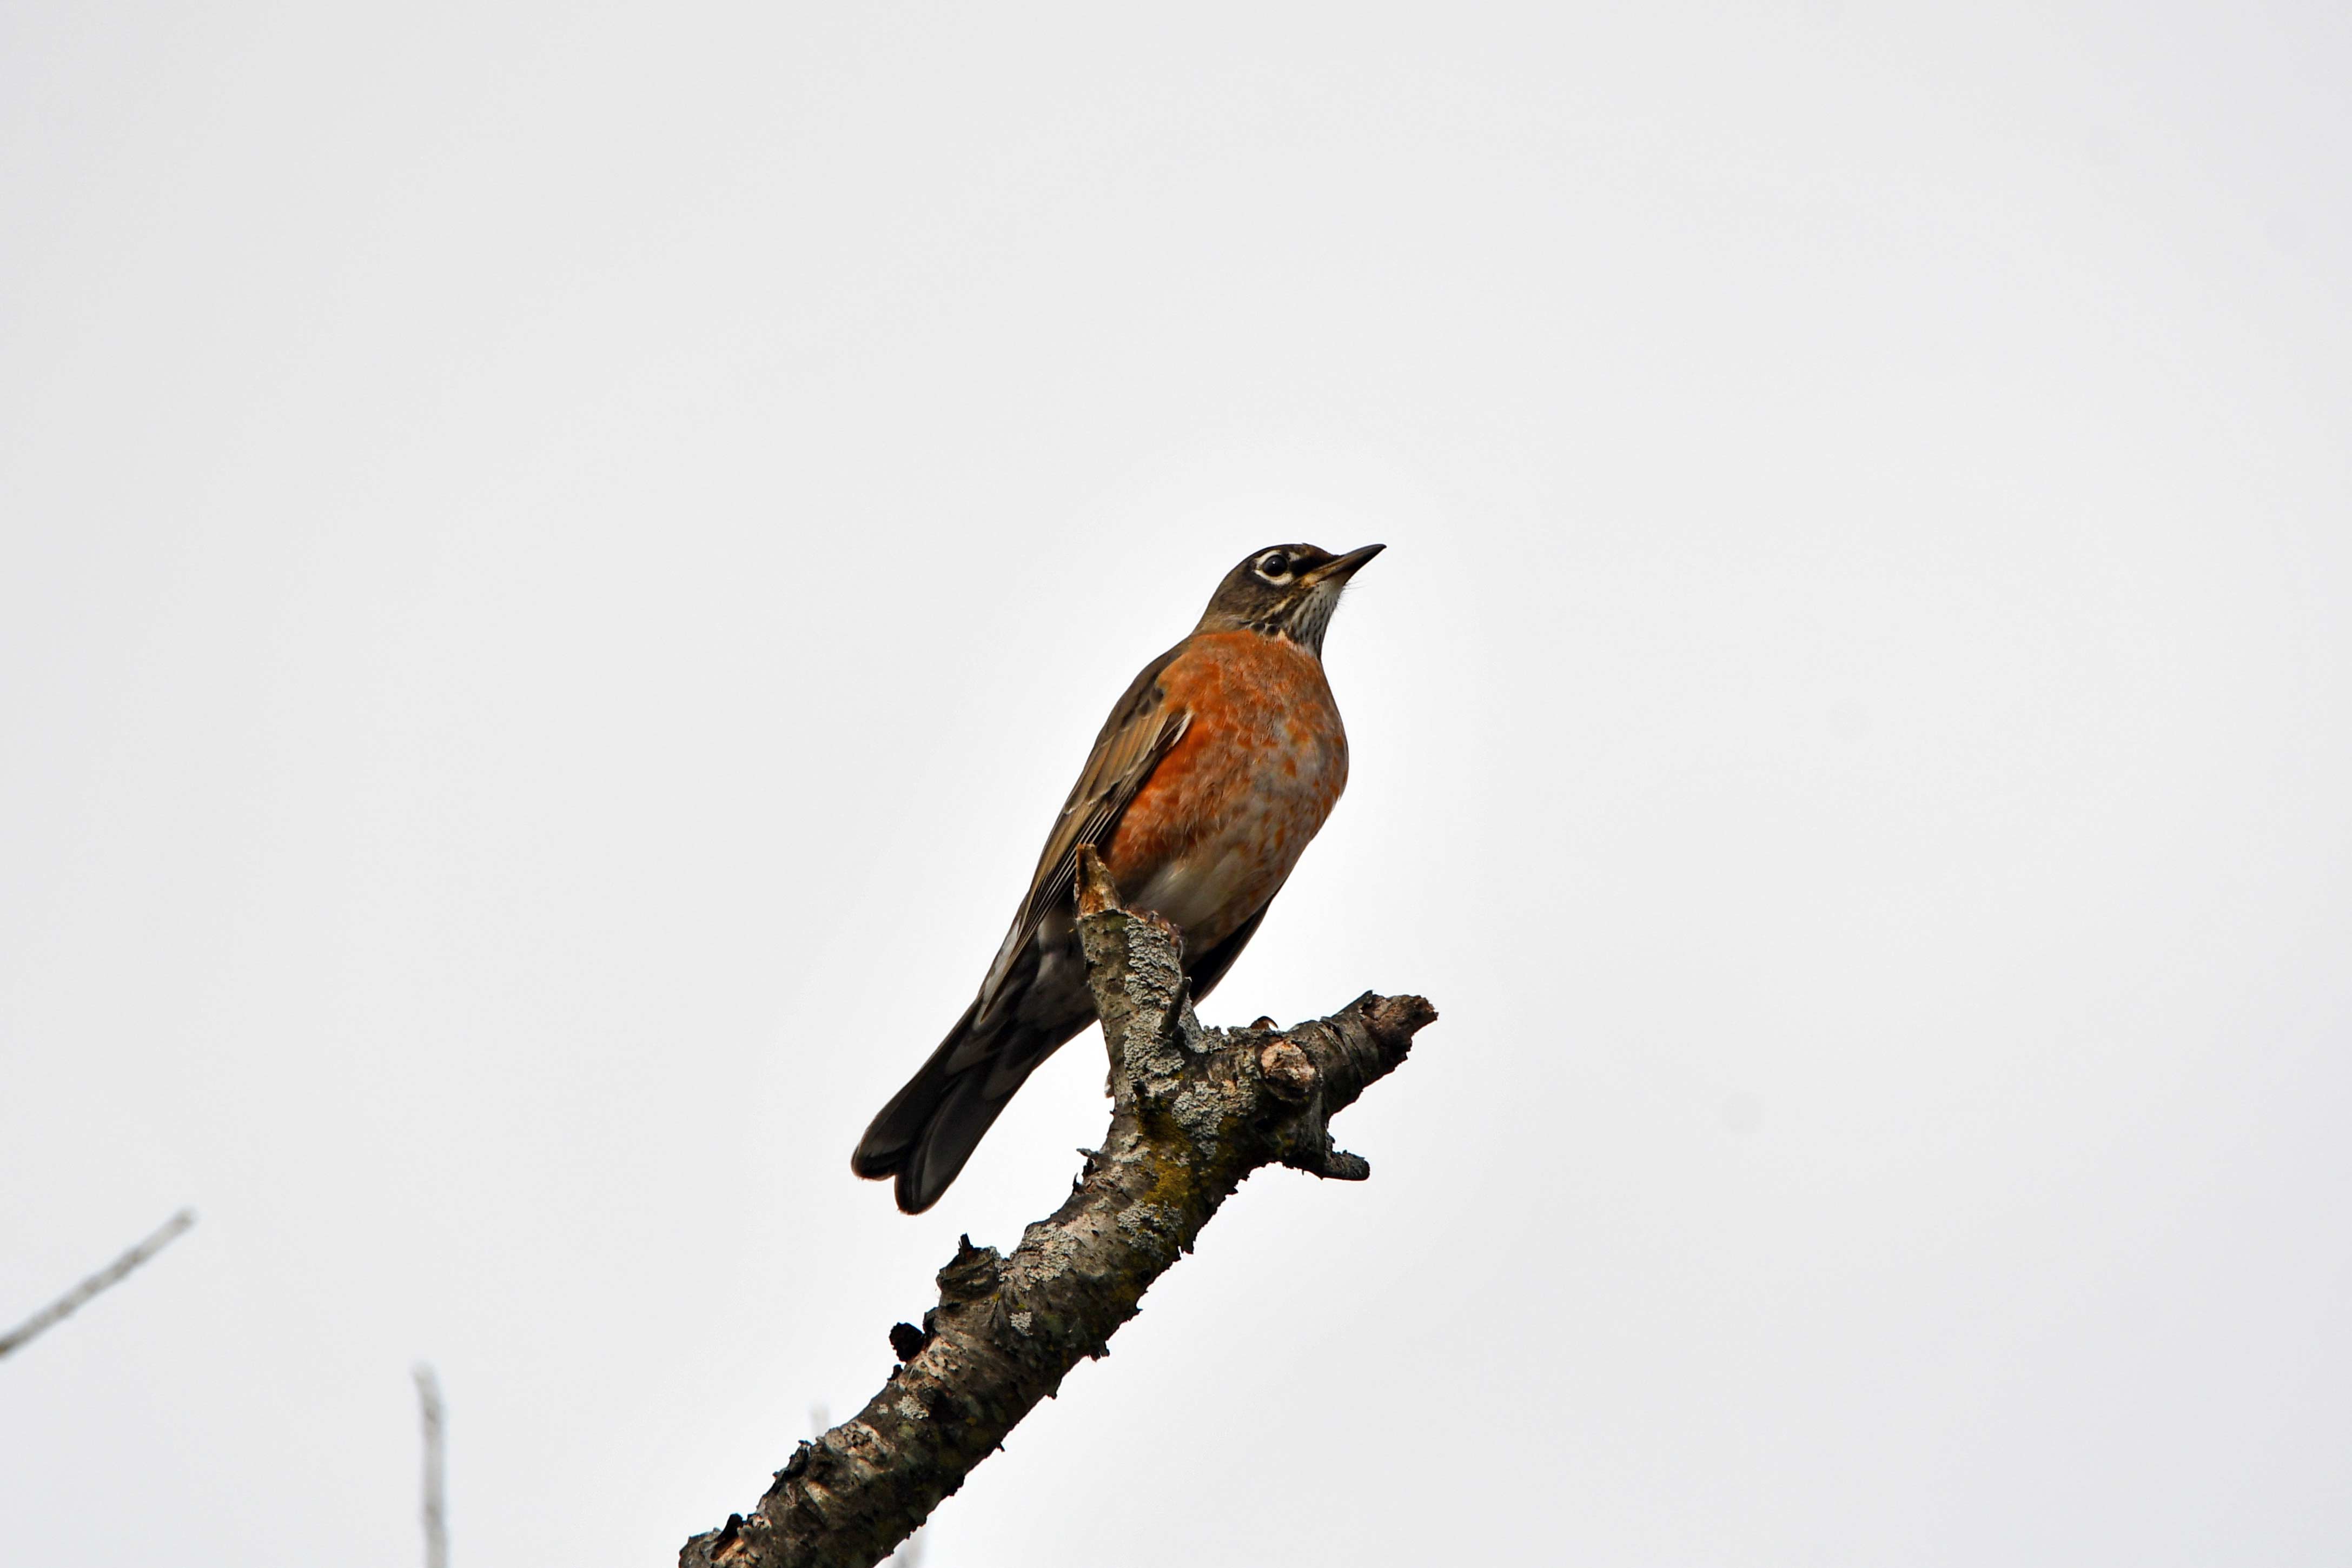 An American robin on a branch.